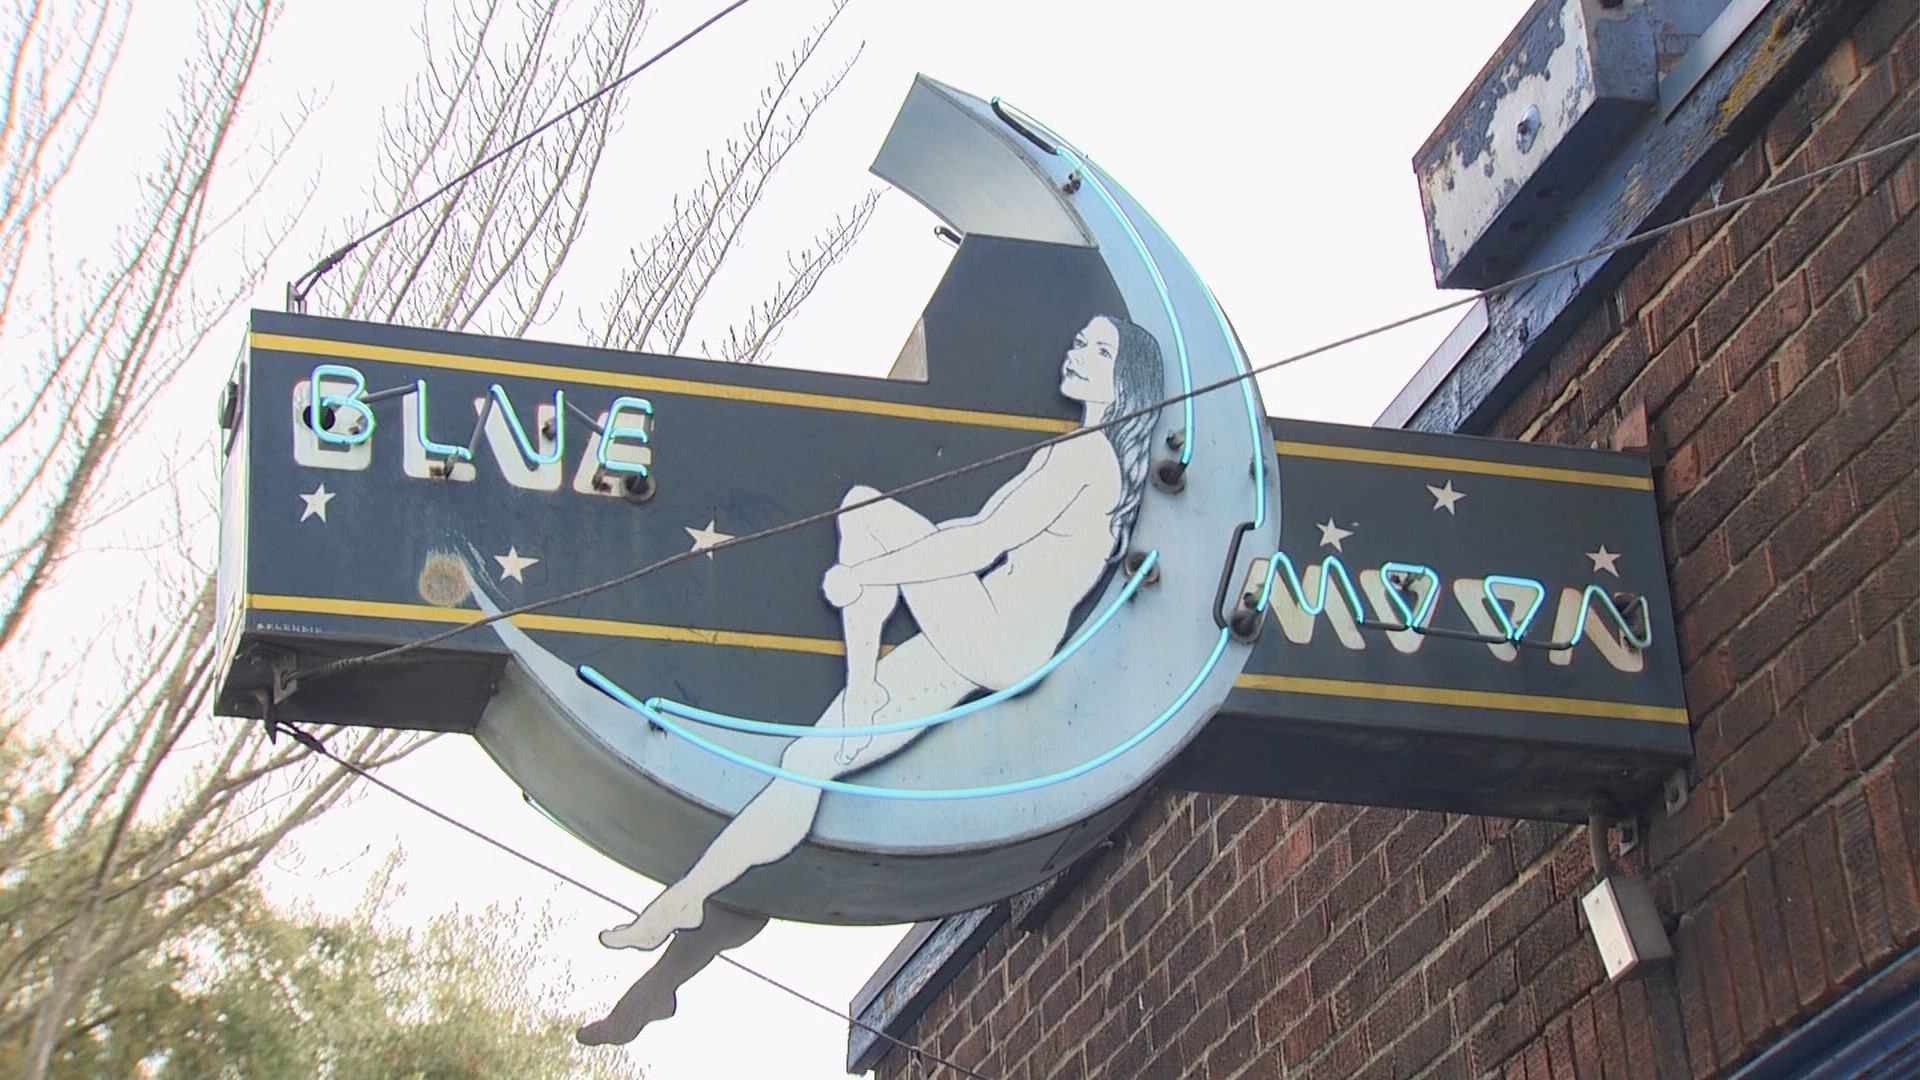 April 9th, 2019 is officially 'Blue Moon Tavern Day' as declared by Seattle Mayor Jenny Durkan.